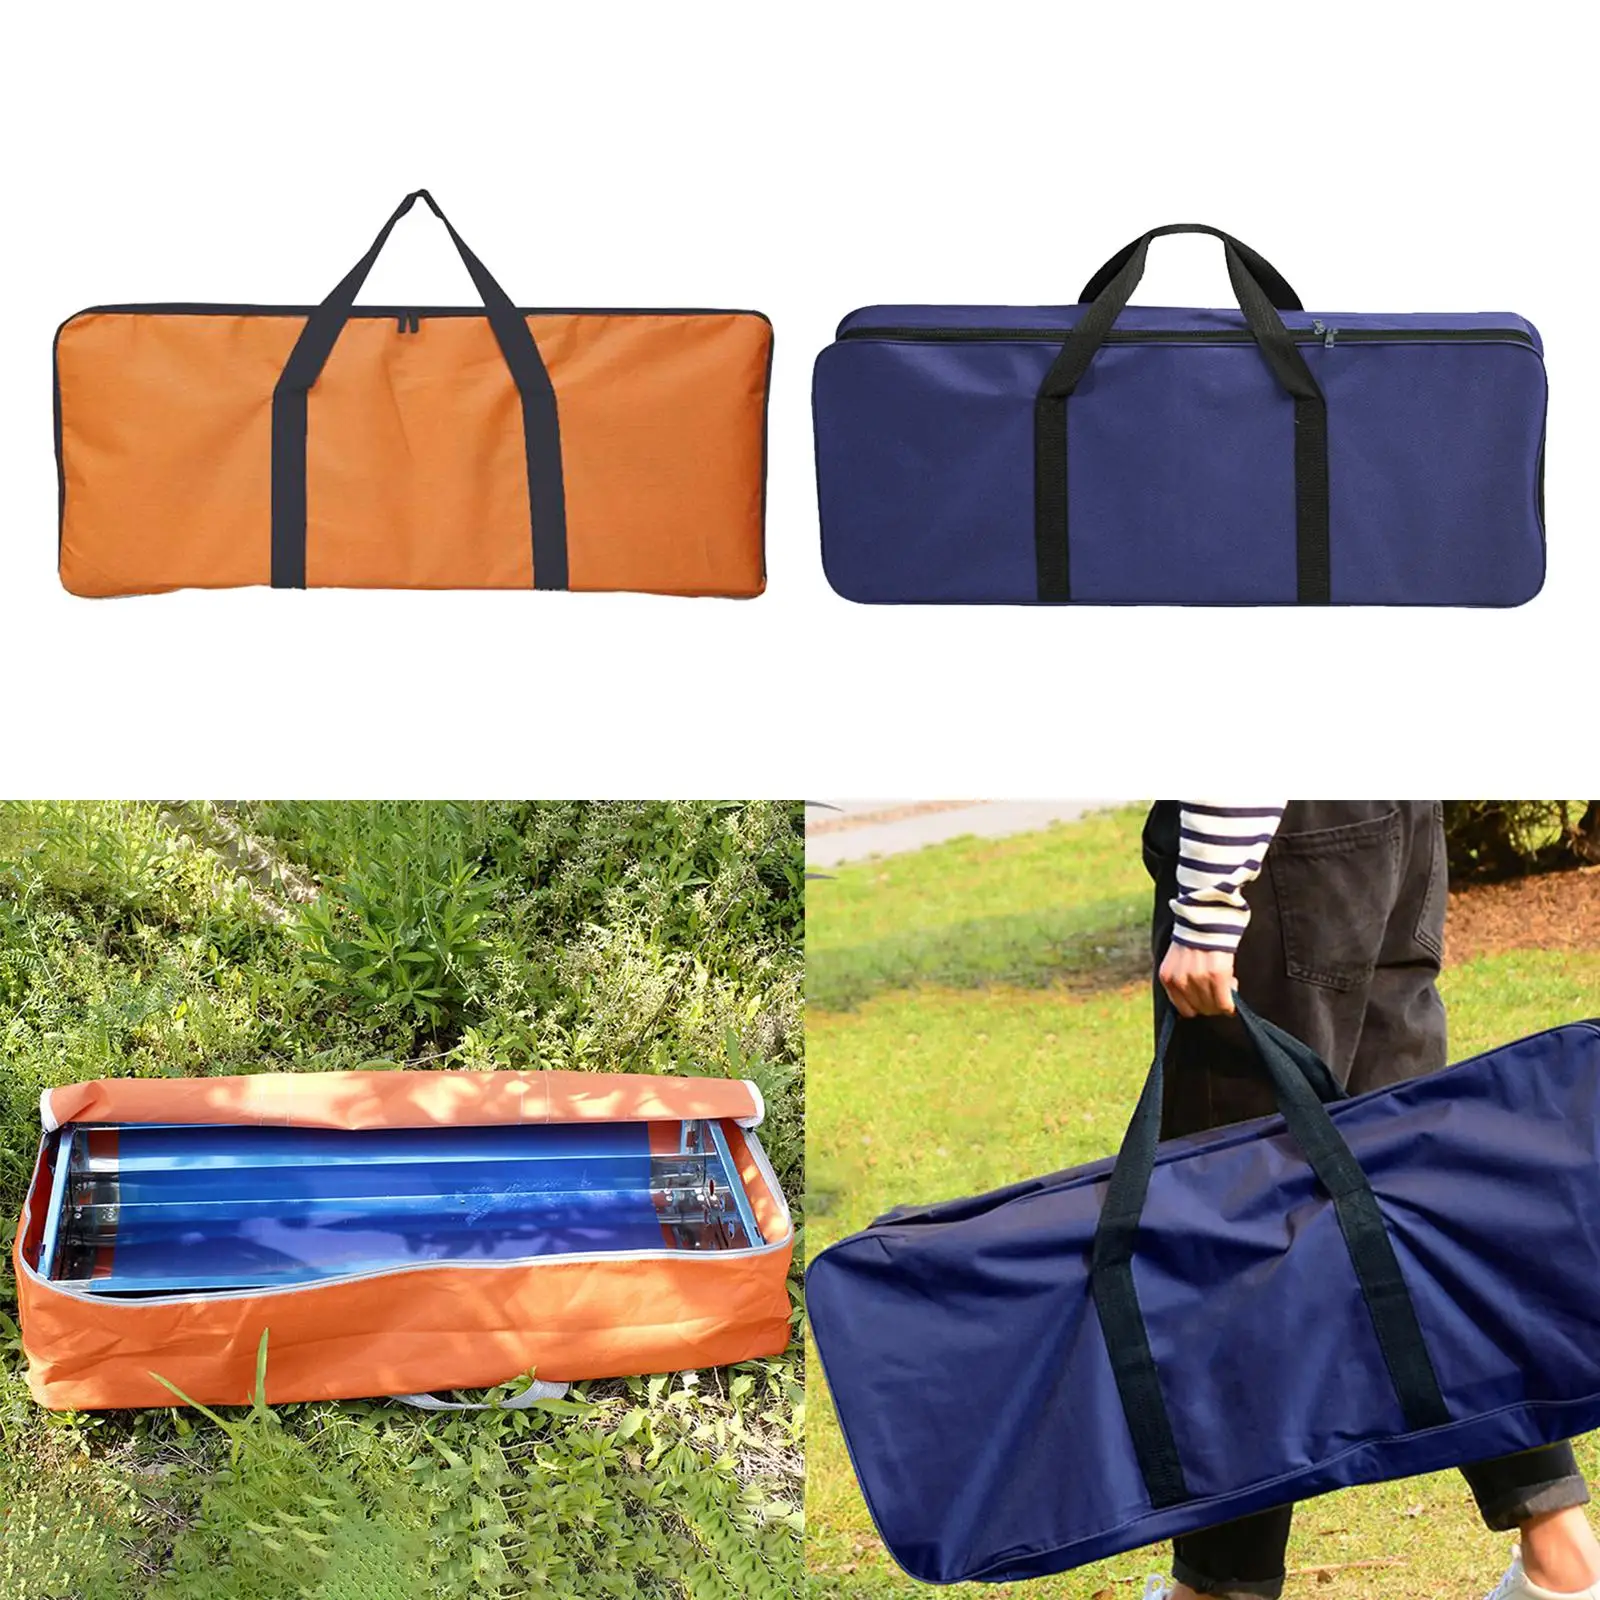 Grill Carry Weather Resistant Waterproof for Outdoor Travel BBQ